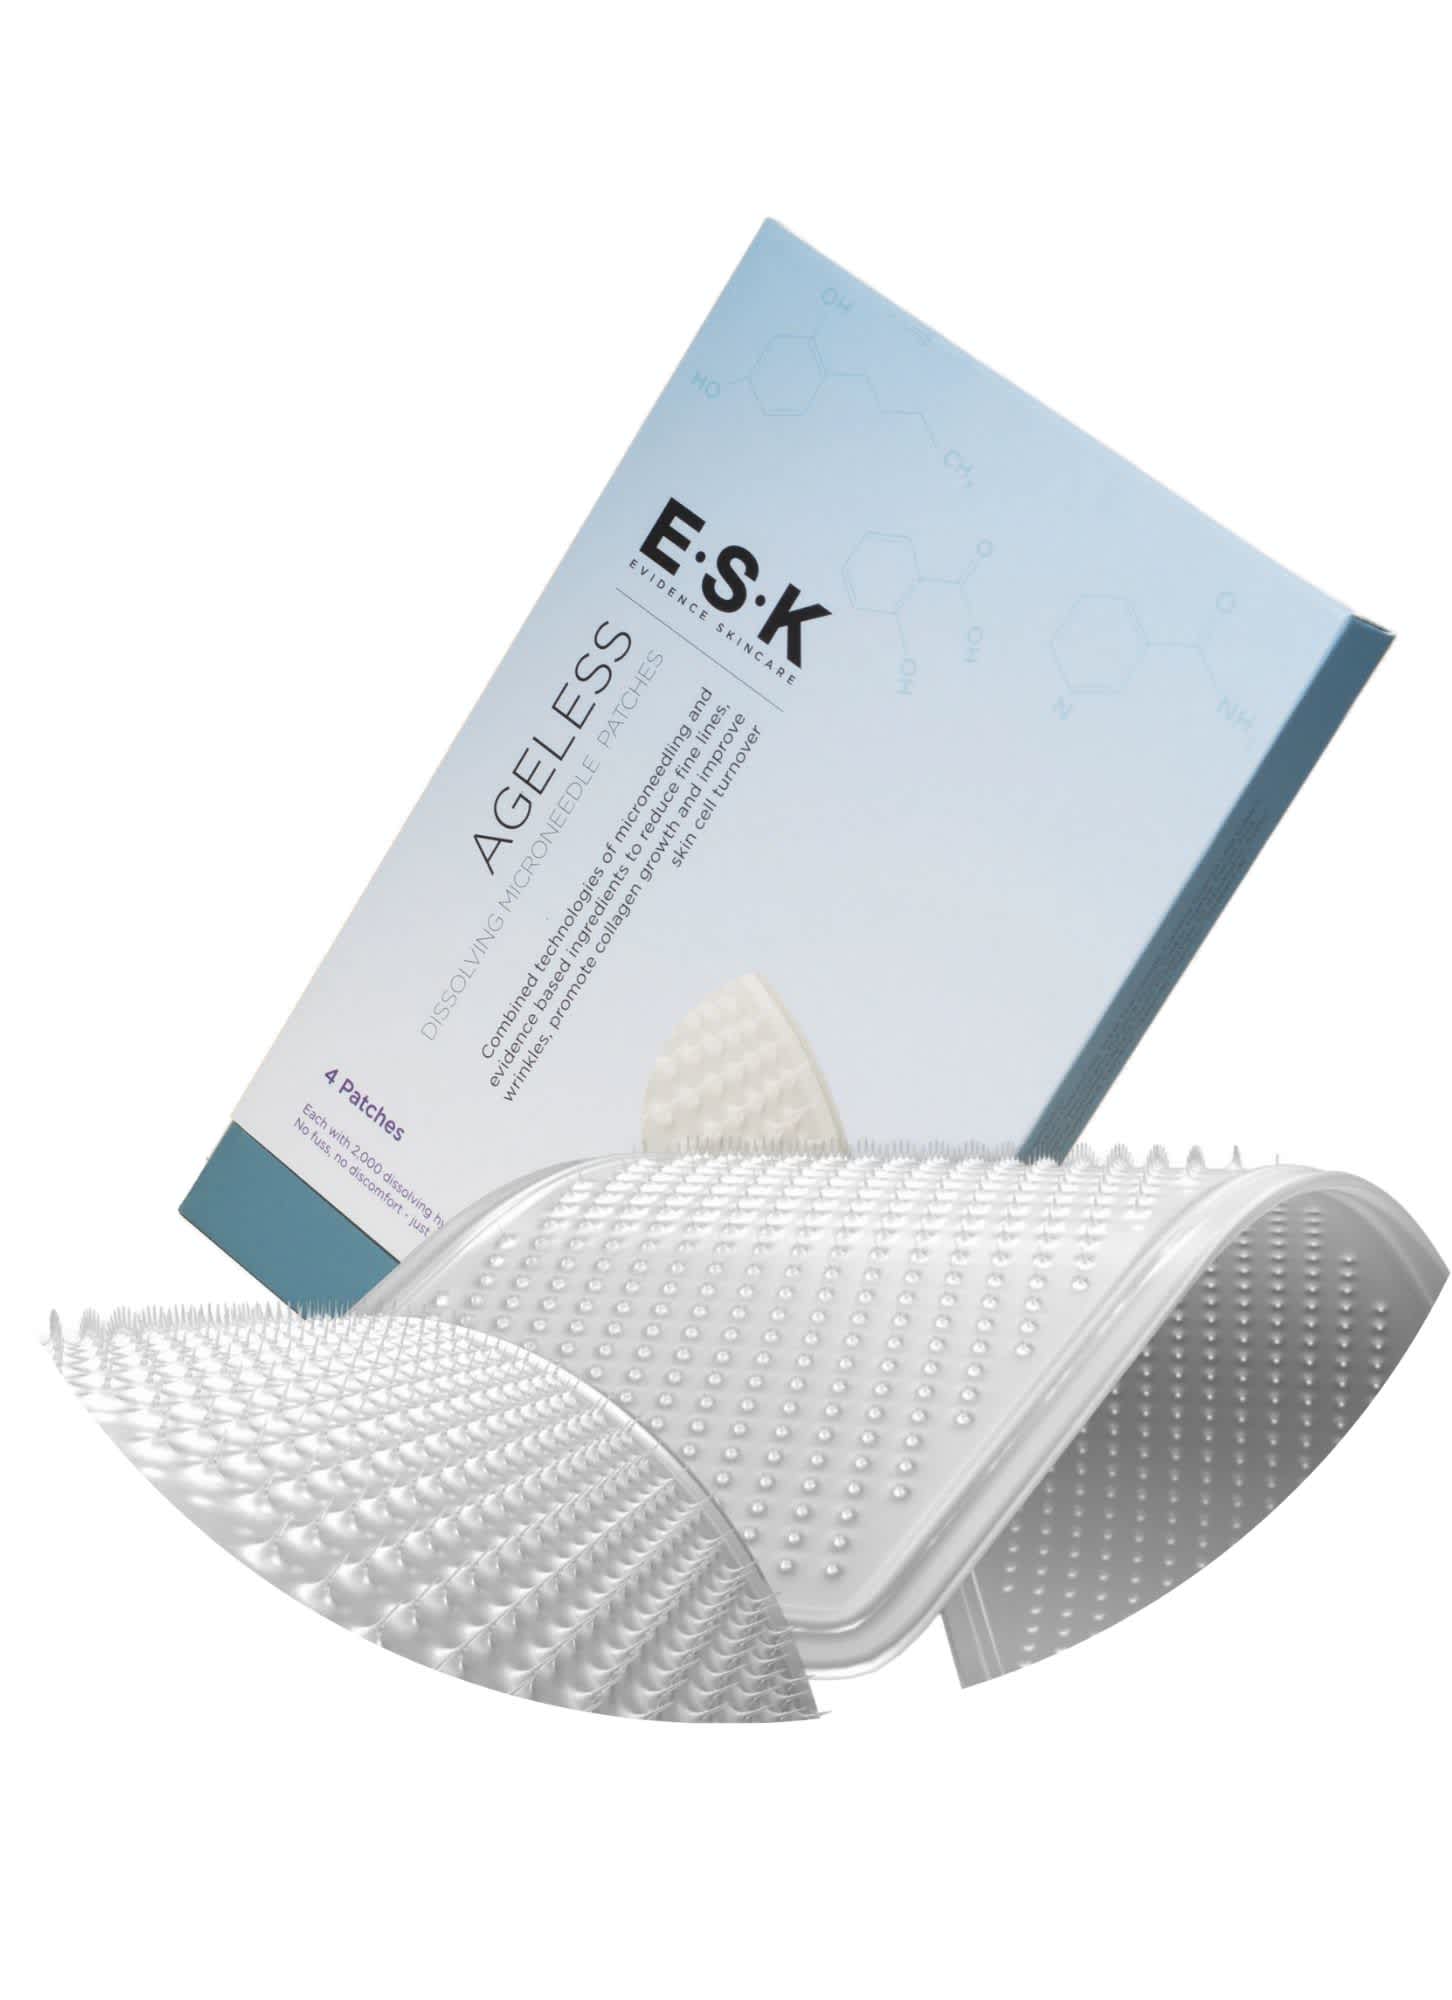 E.S.K Ageless: Microneedles Patch